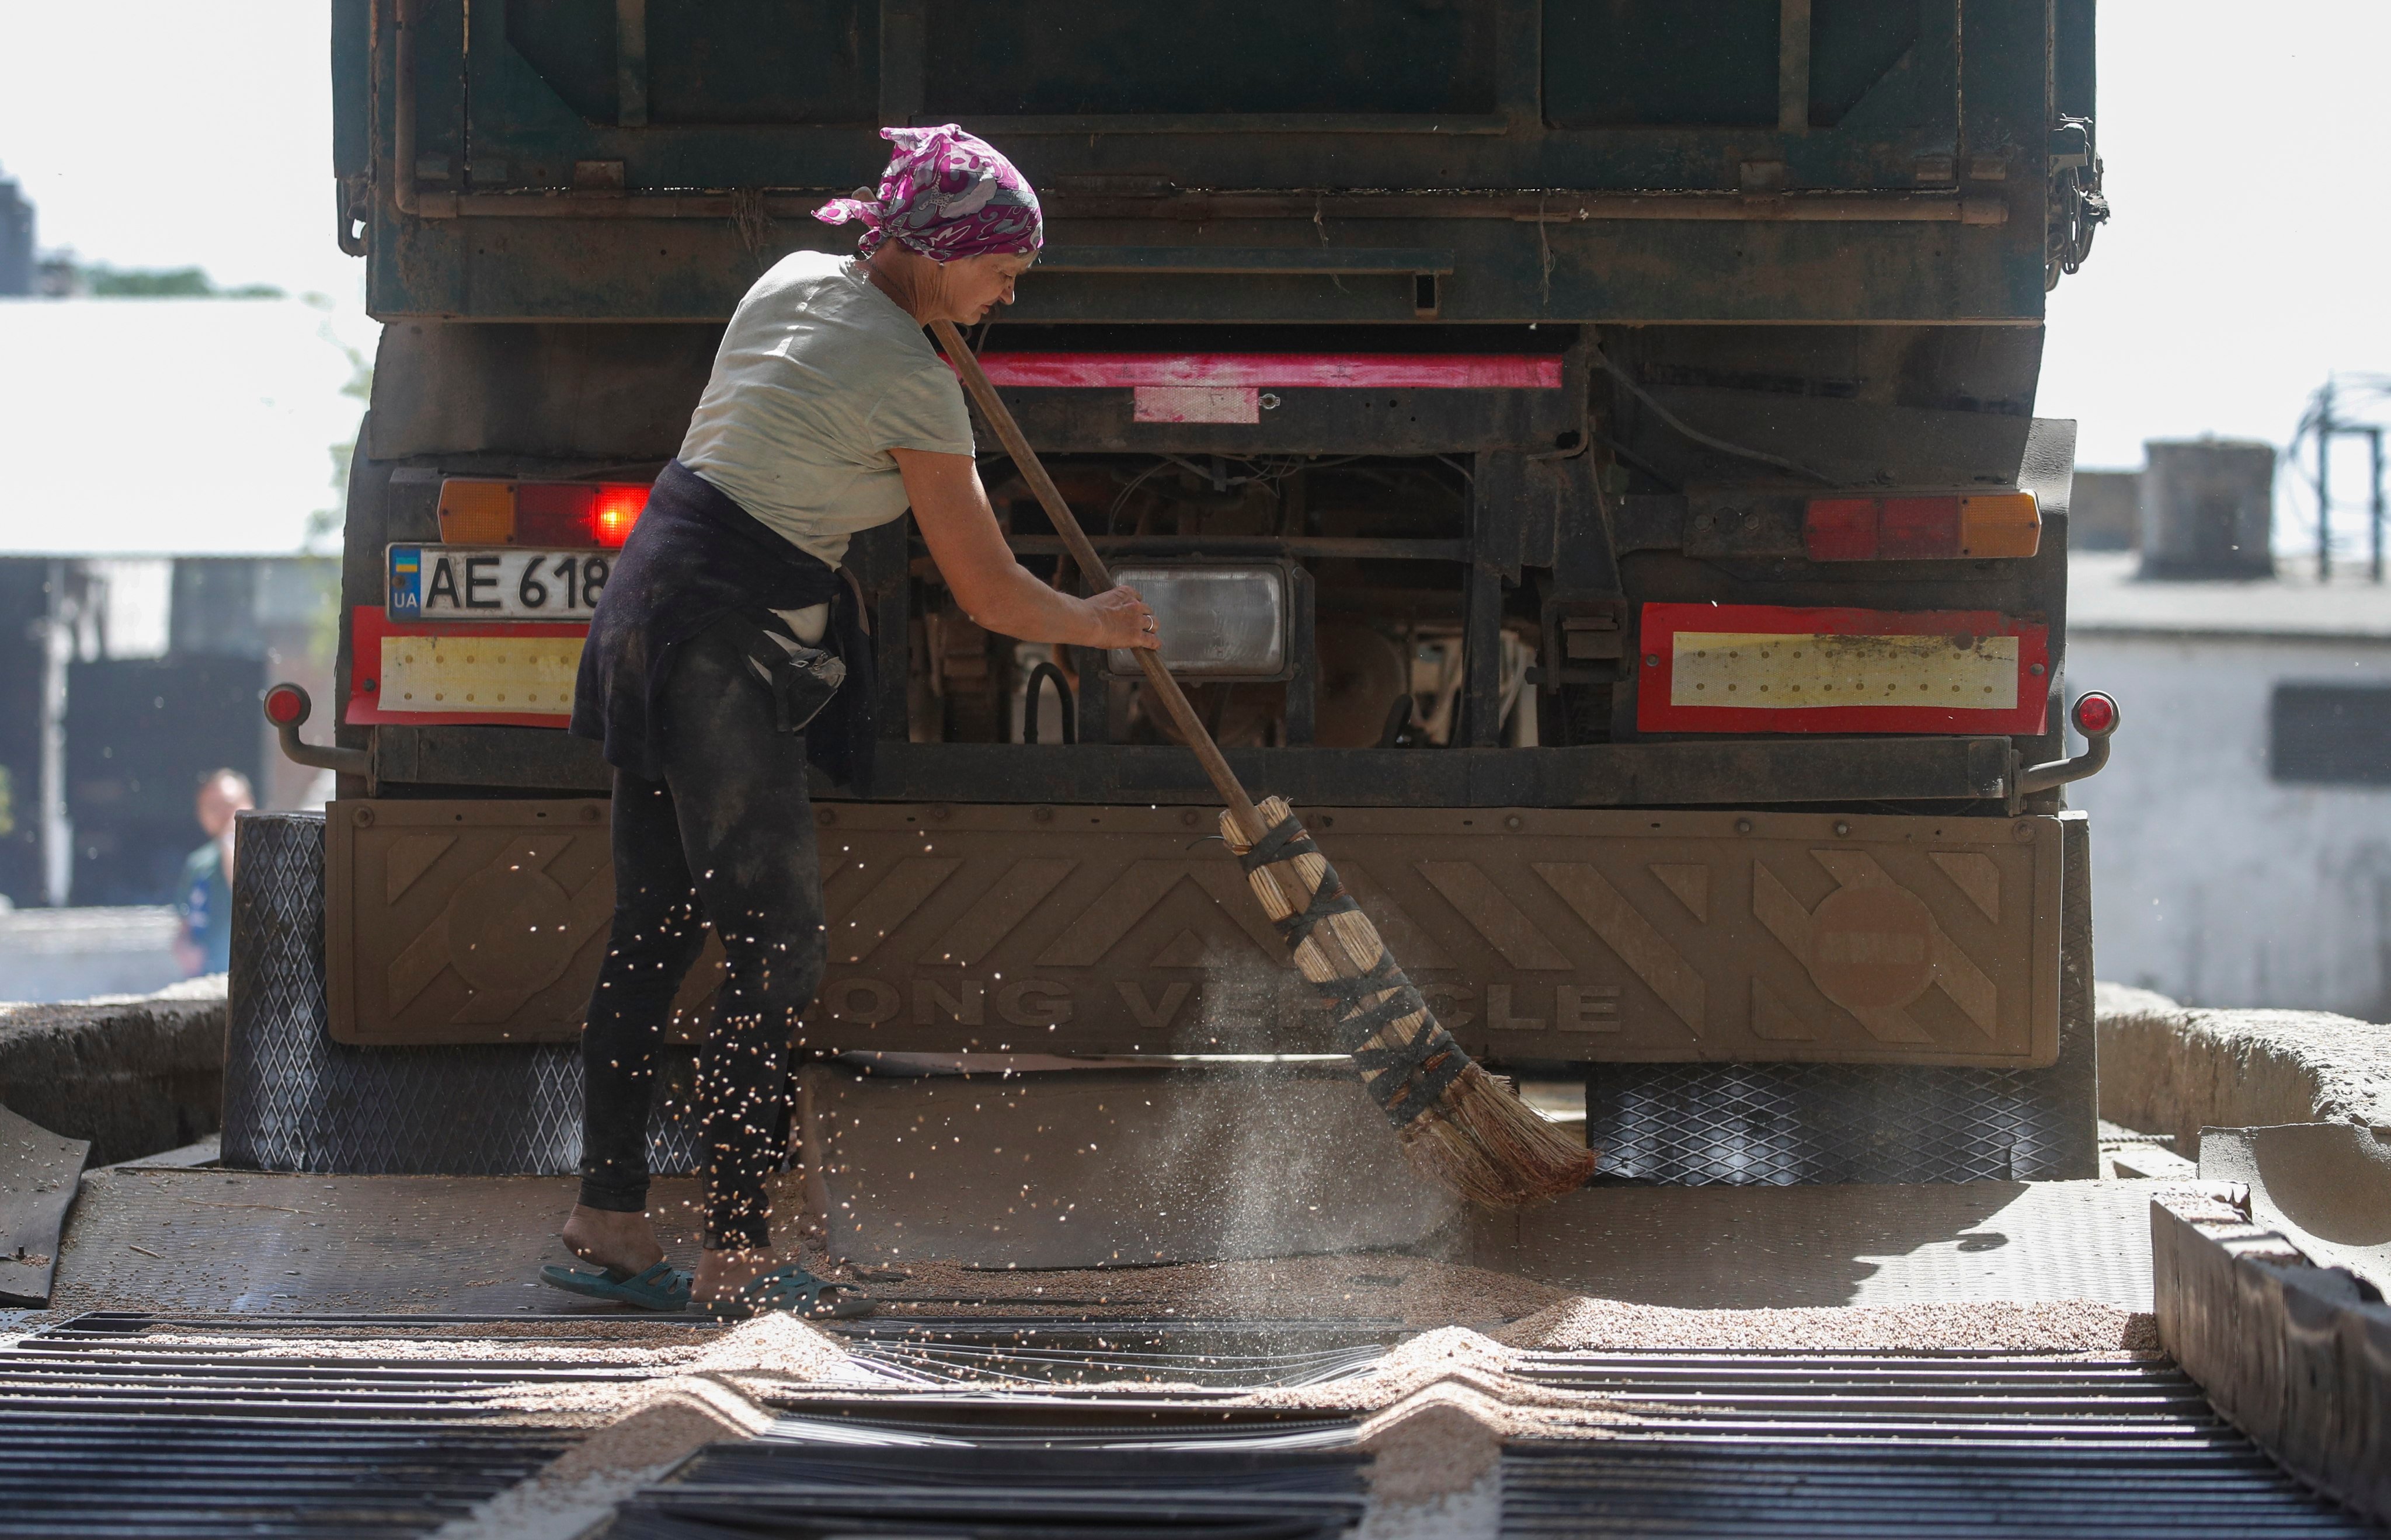 A woman finishes unloading wheat from a truck at a grain storage facility in Ukraine’s southeastern Zaporizhia region on July 14. Photo: EPA-EFE